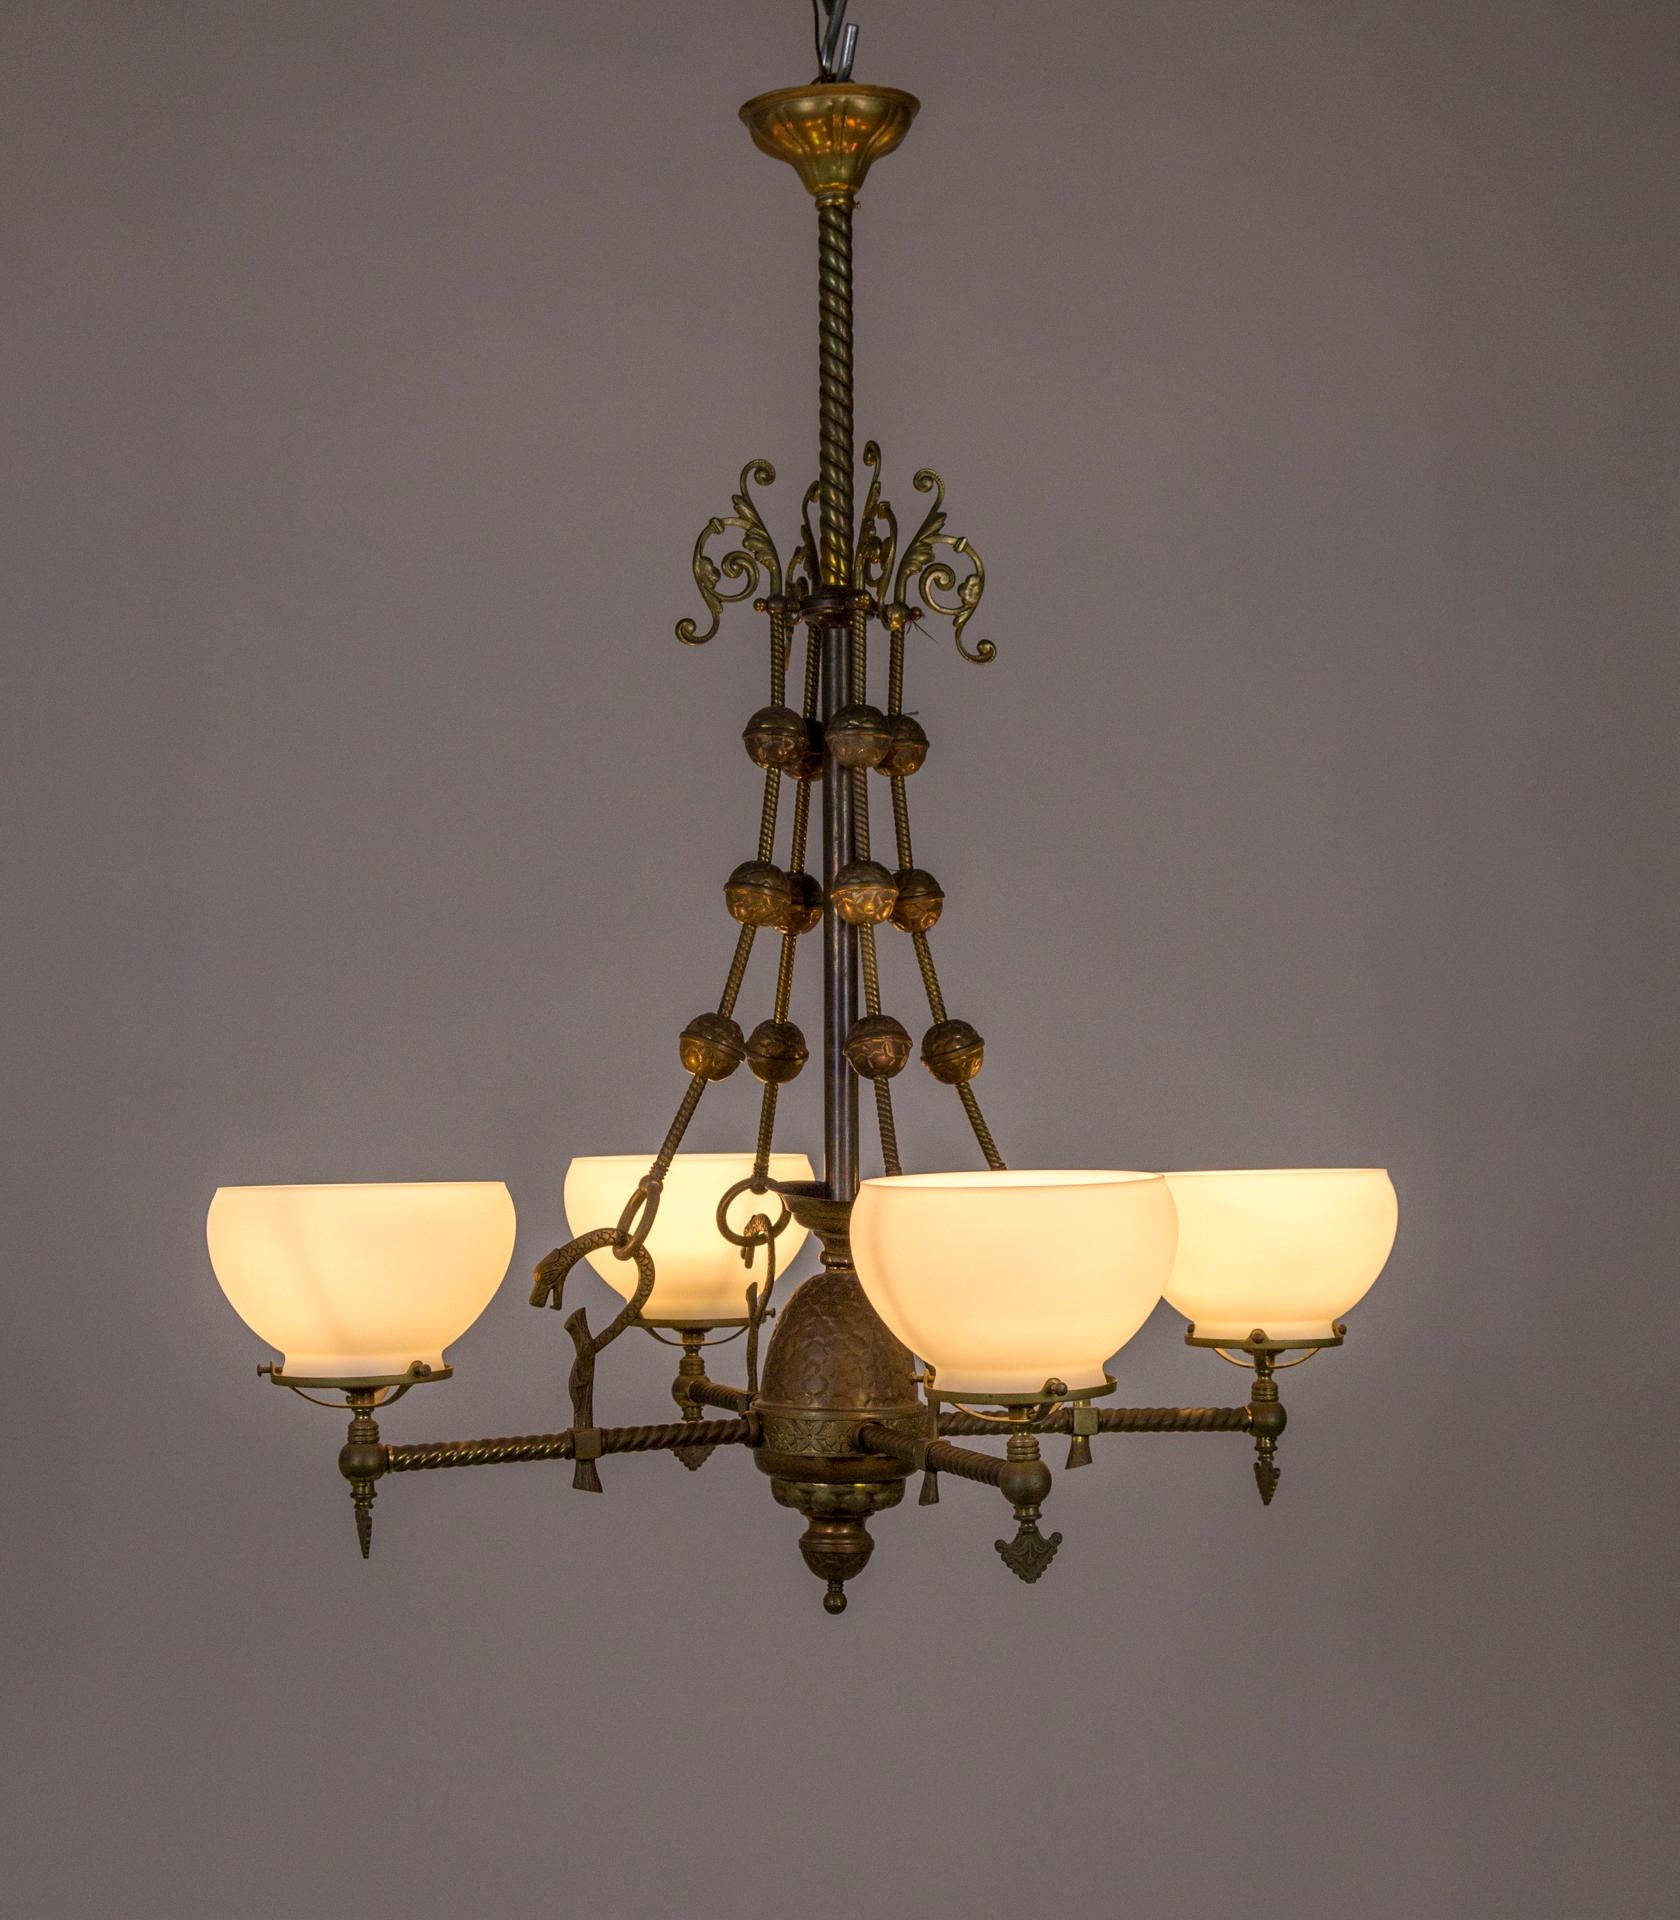 This quality, detailed chandelier takes a moment to fully appreciate. The main construction is of brass, with the detailing in embossed copper and brass. Notice the stylized cast bronze dragons atop tree trunks at the center
of each arm, and the